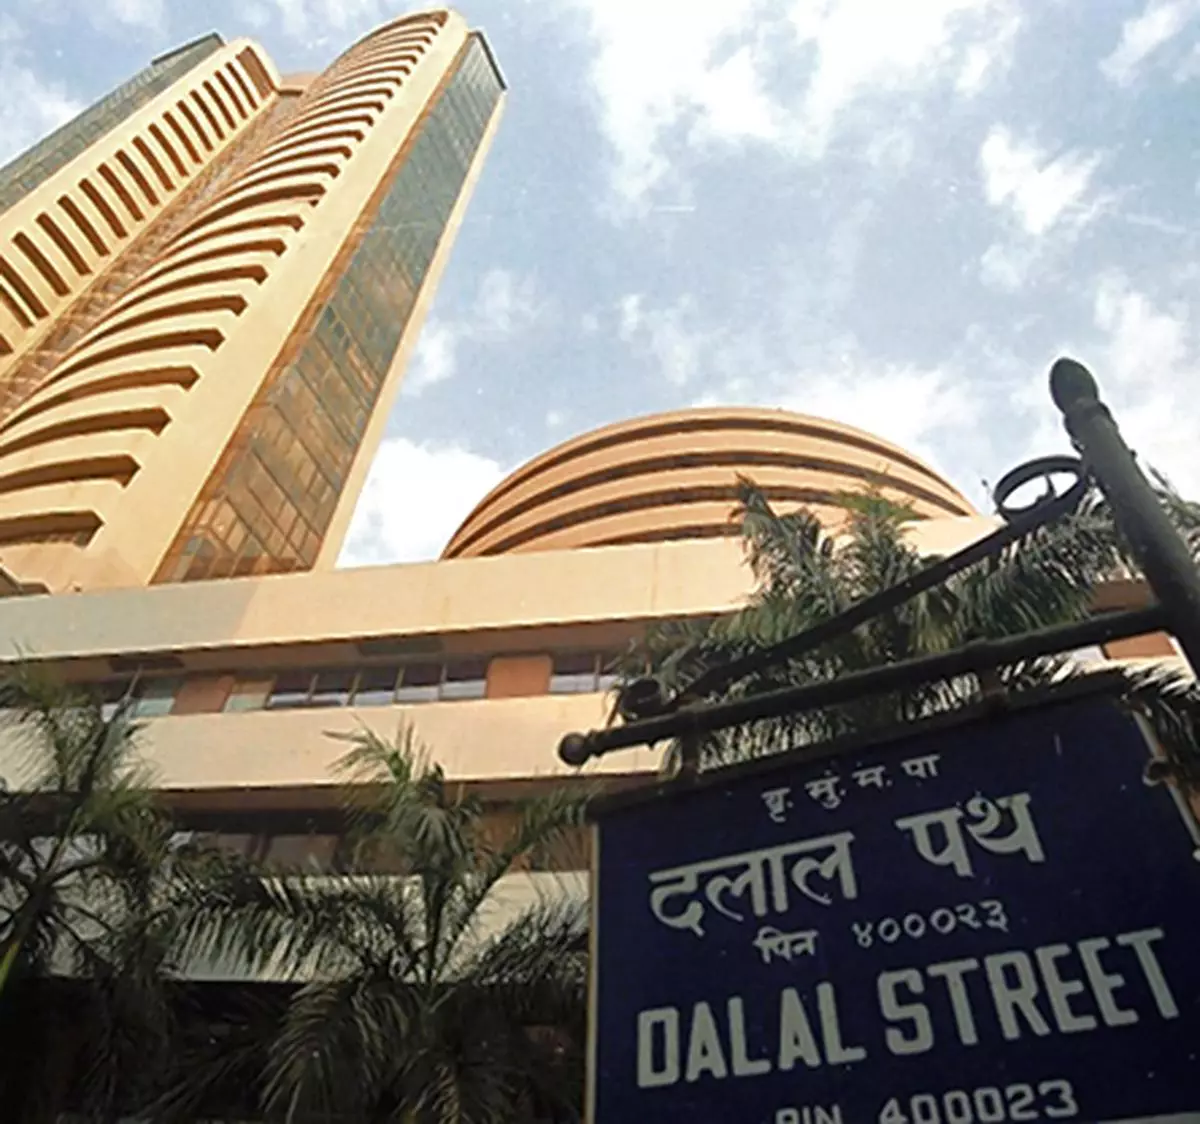 Sensex falls over 600 pts in line with Asian peers - The Hindu BusinessLine